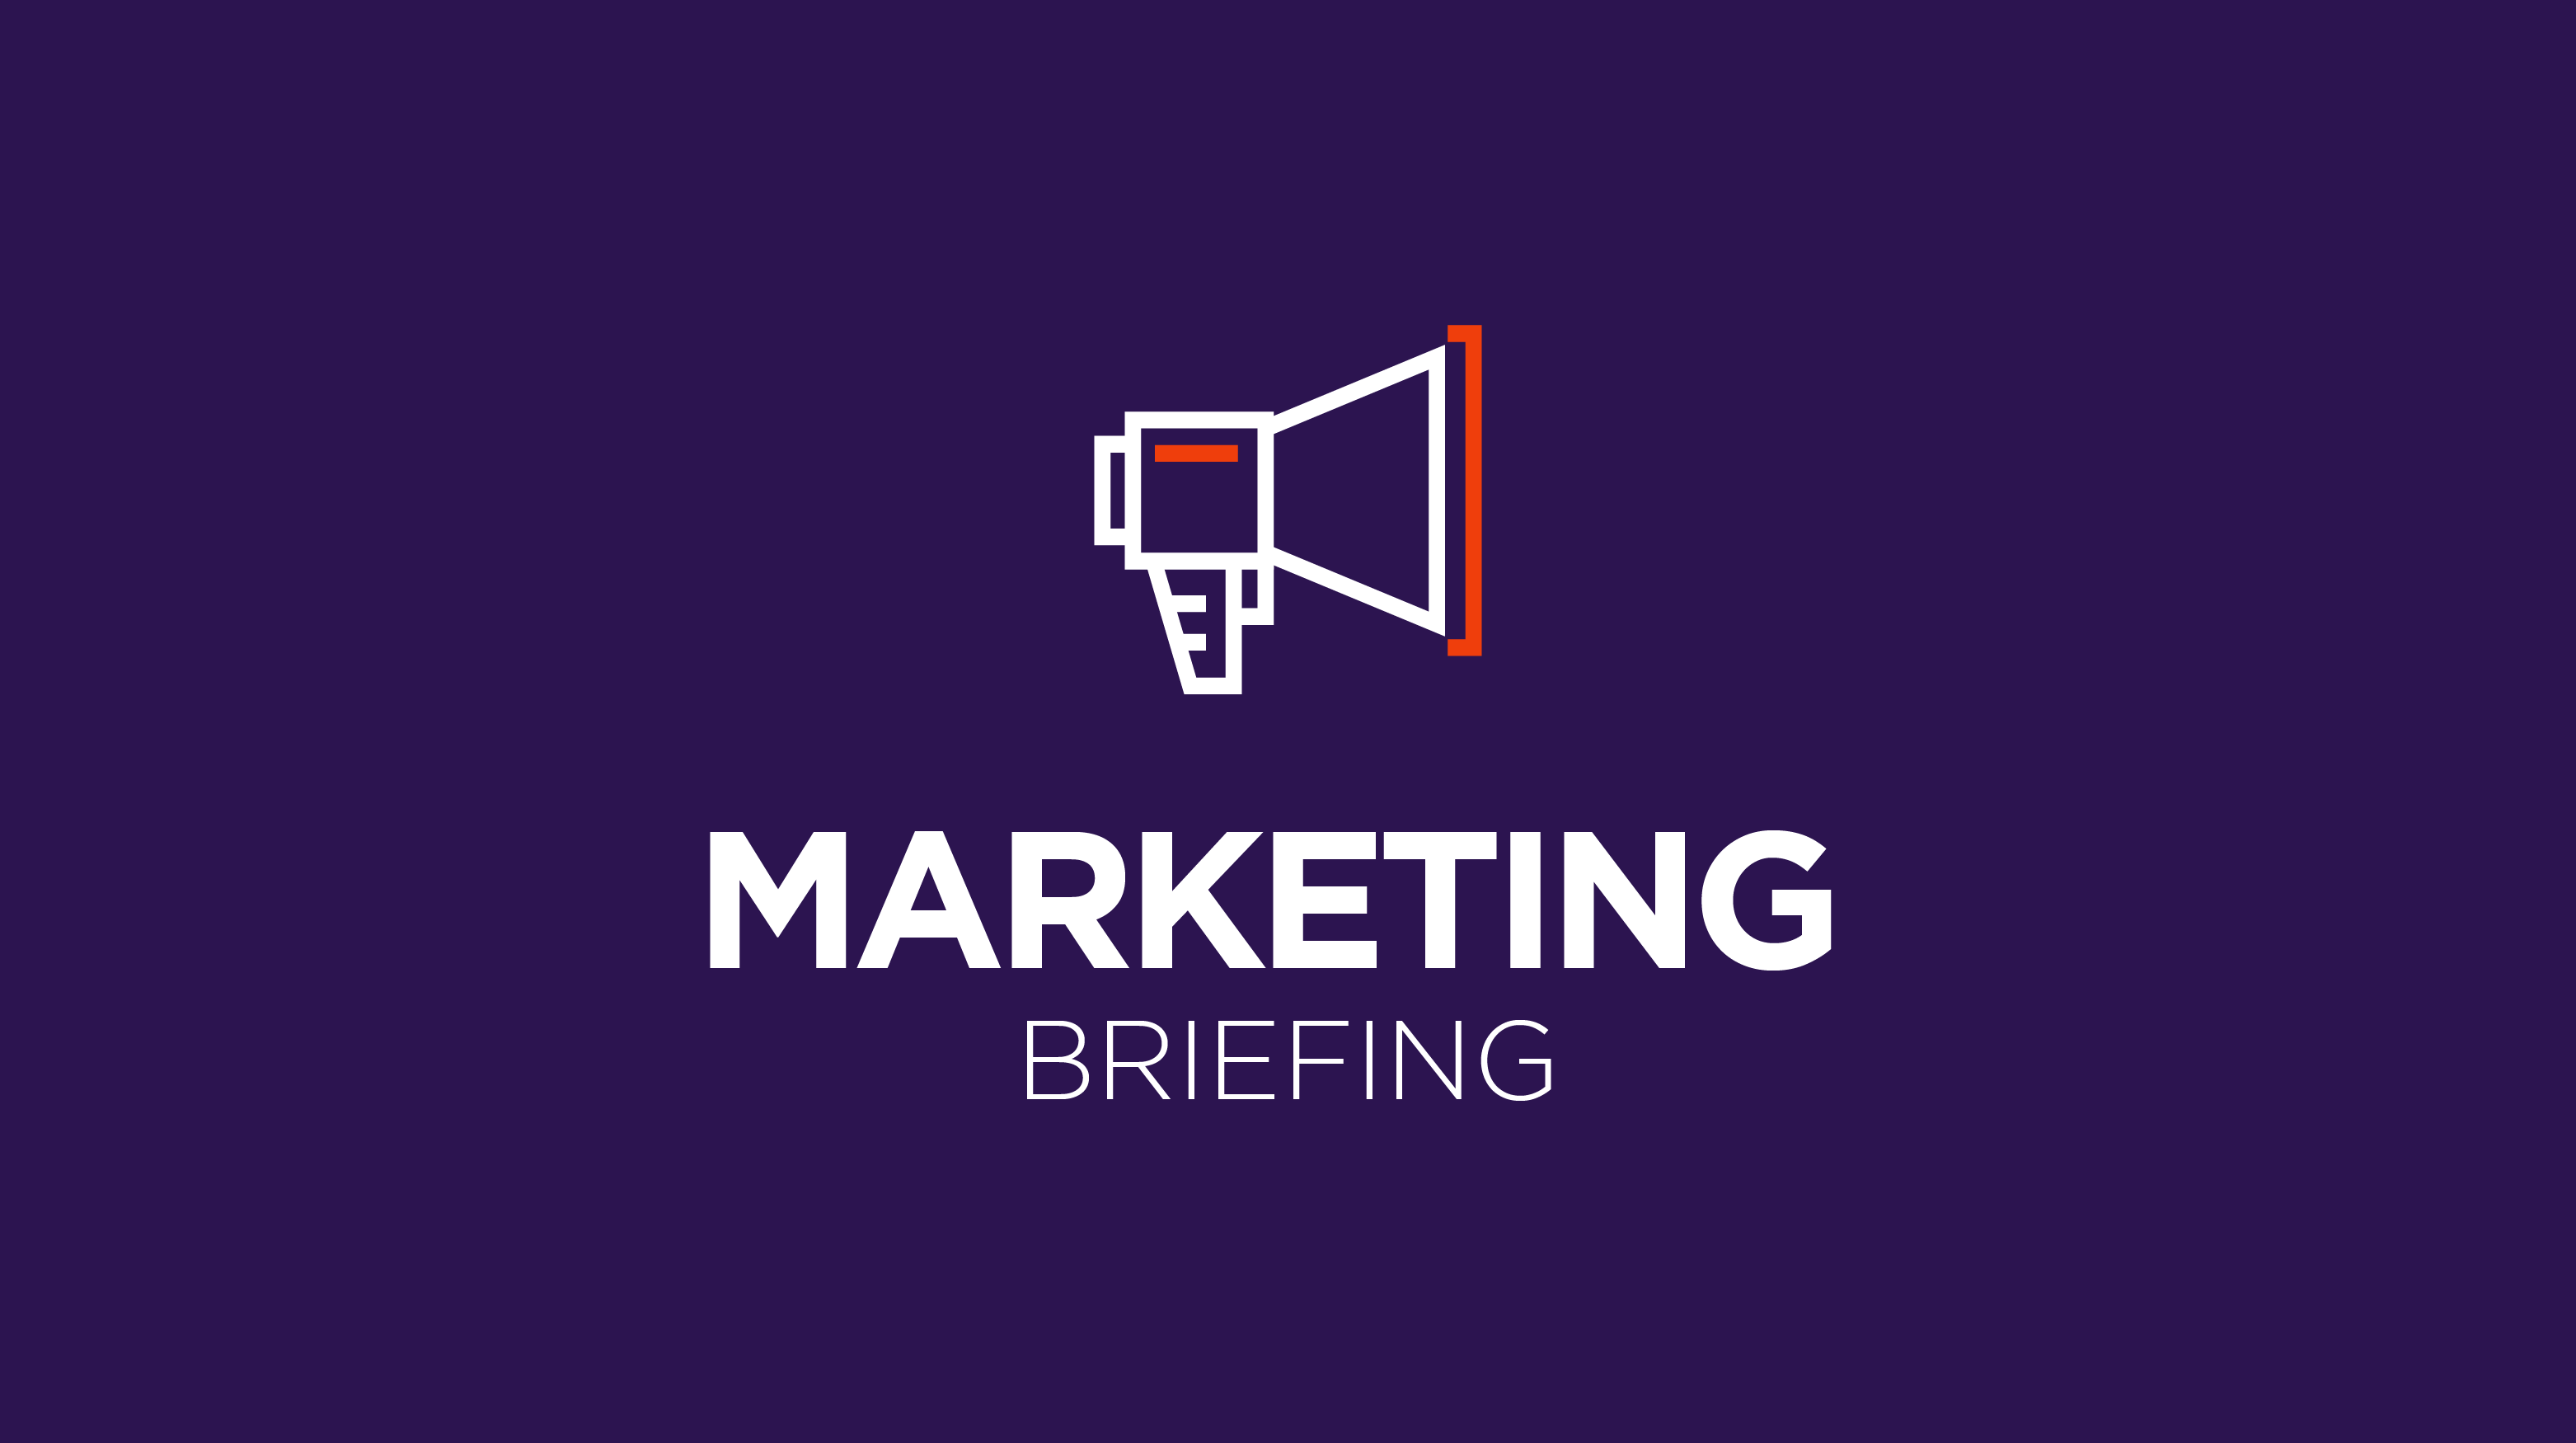 Marketing Briefing: The case of product-first and the SEO burst